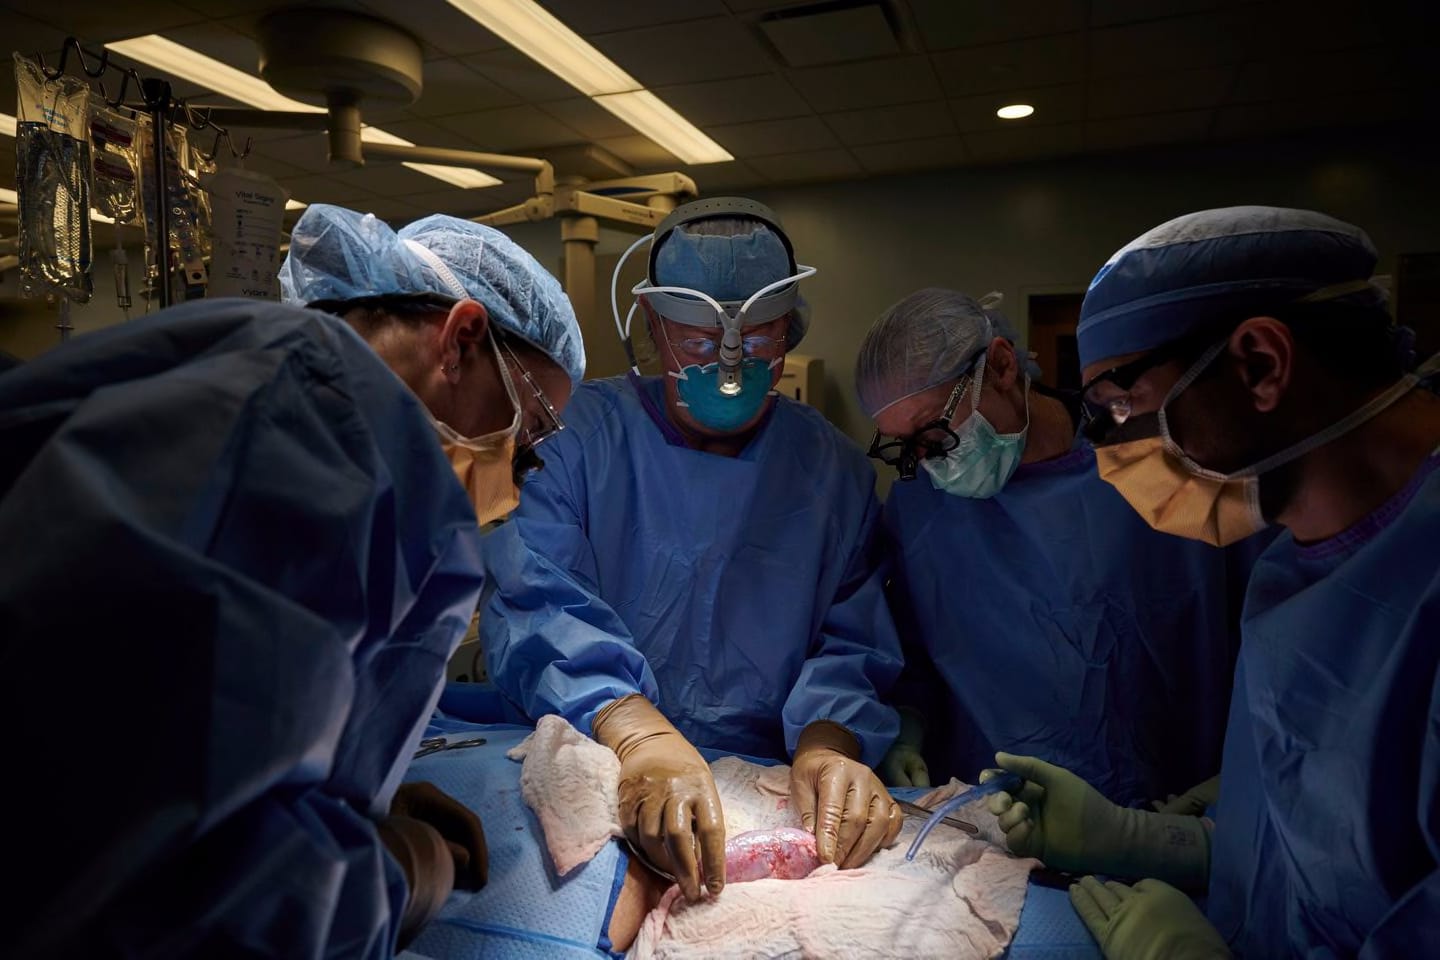 A surgical team at the hospital in New York examined a pig kidney attached to the body of a deceased recipient for any signs of rejection in September. From left to right are Drs. Zoe A. Stewart-Lewis, Robert A. Montgomery, Bonnie E. Lonze, and Jeffrey Stern.